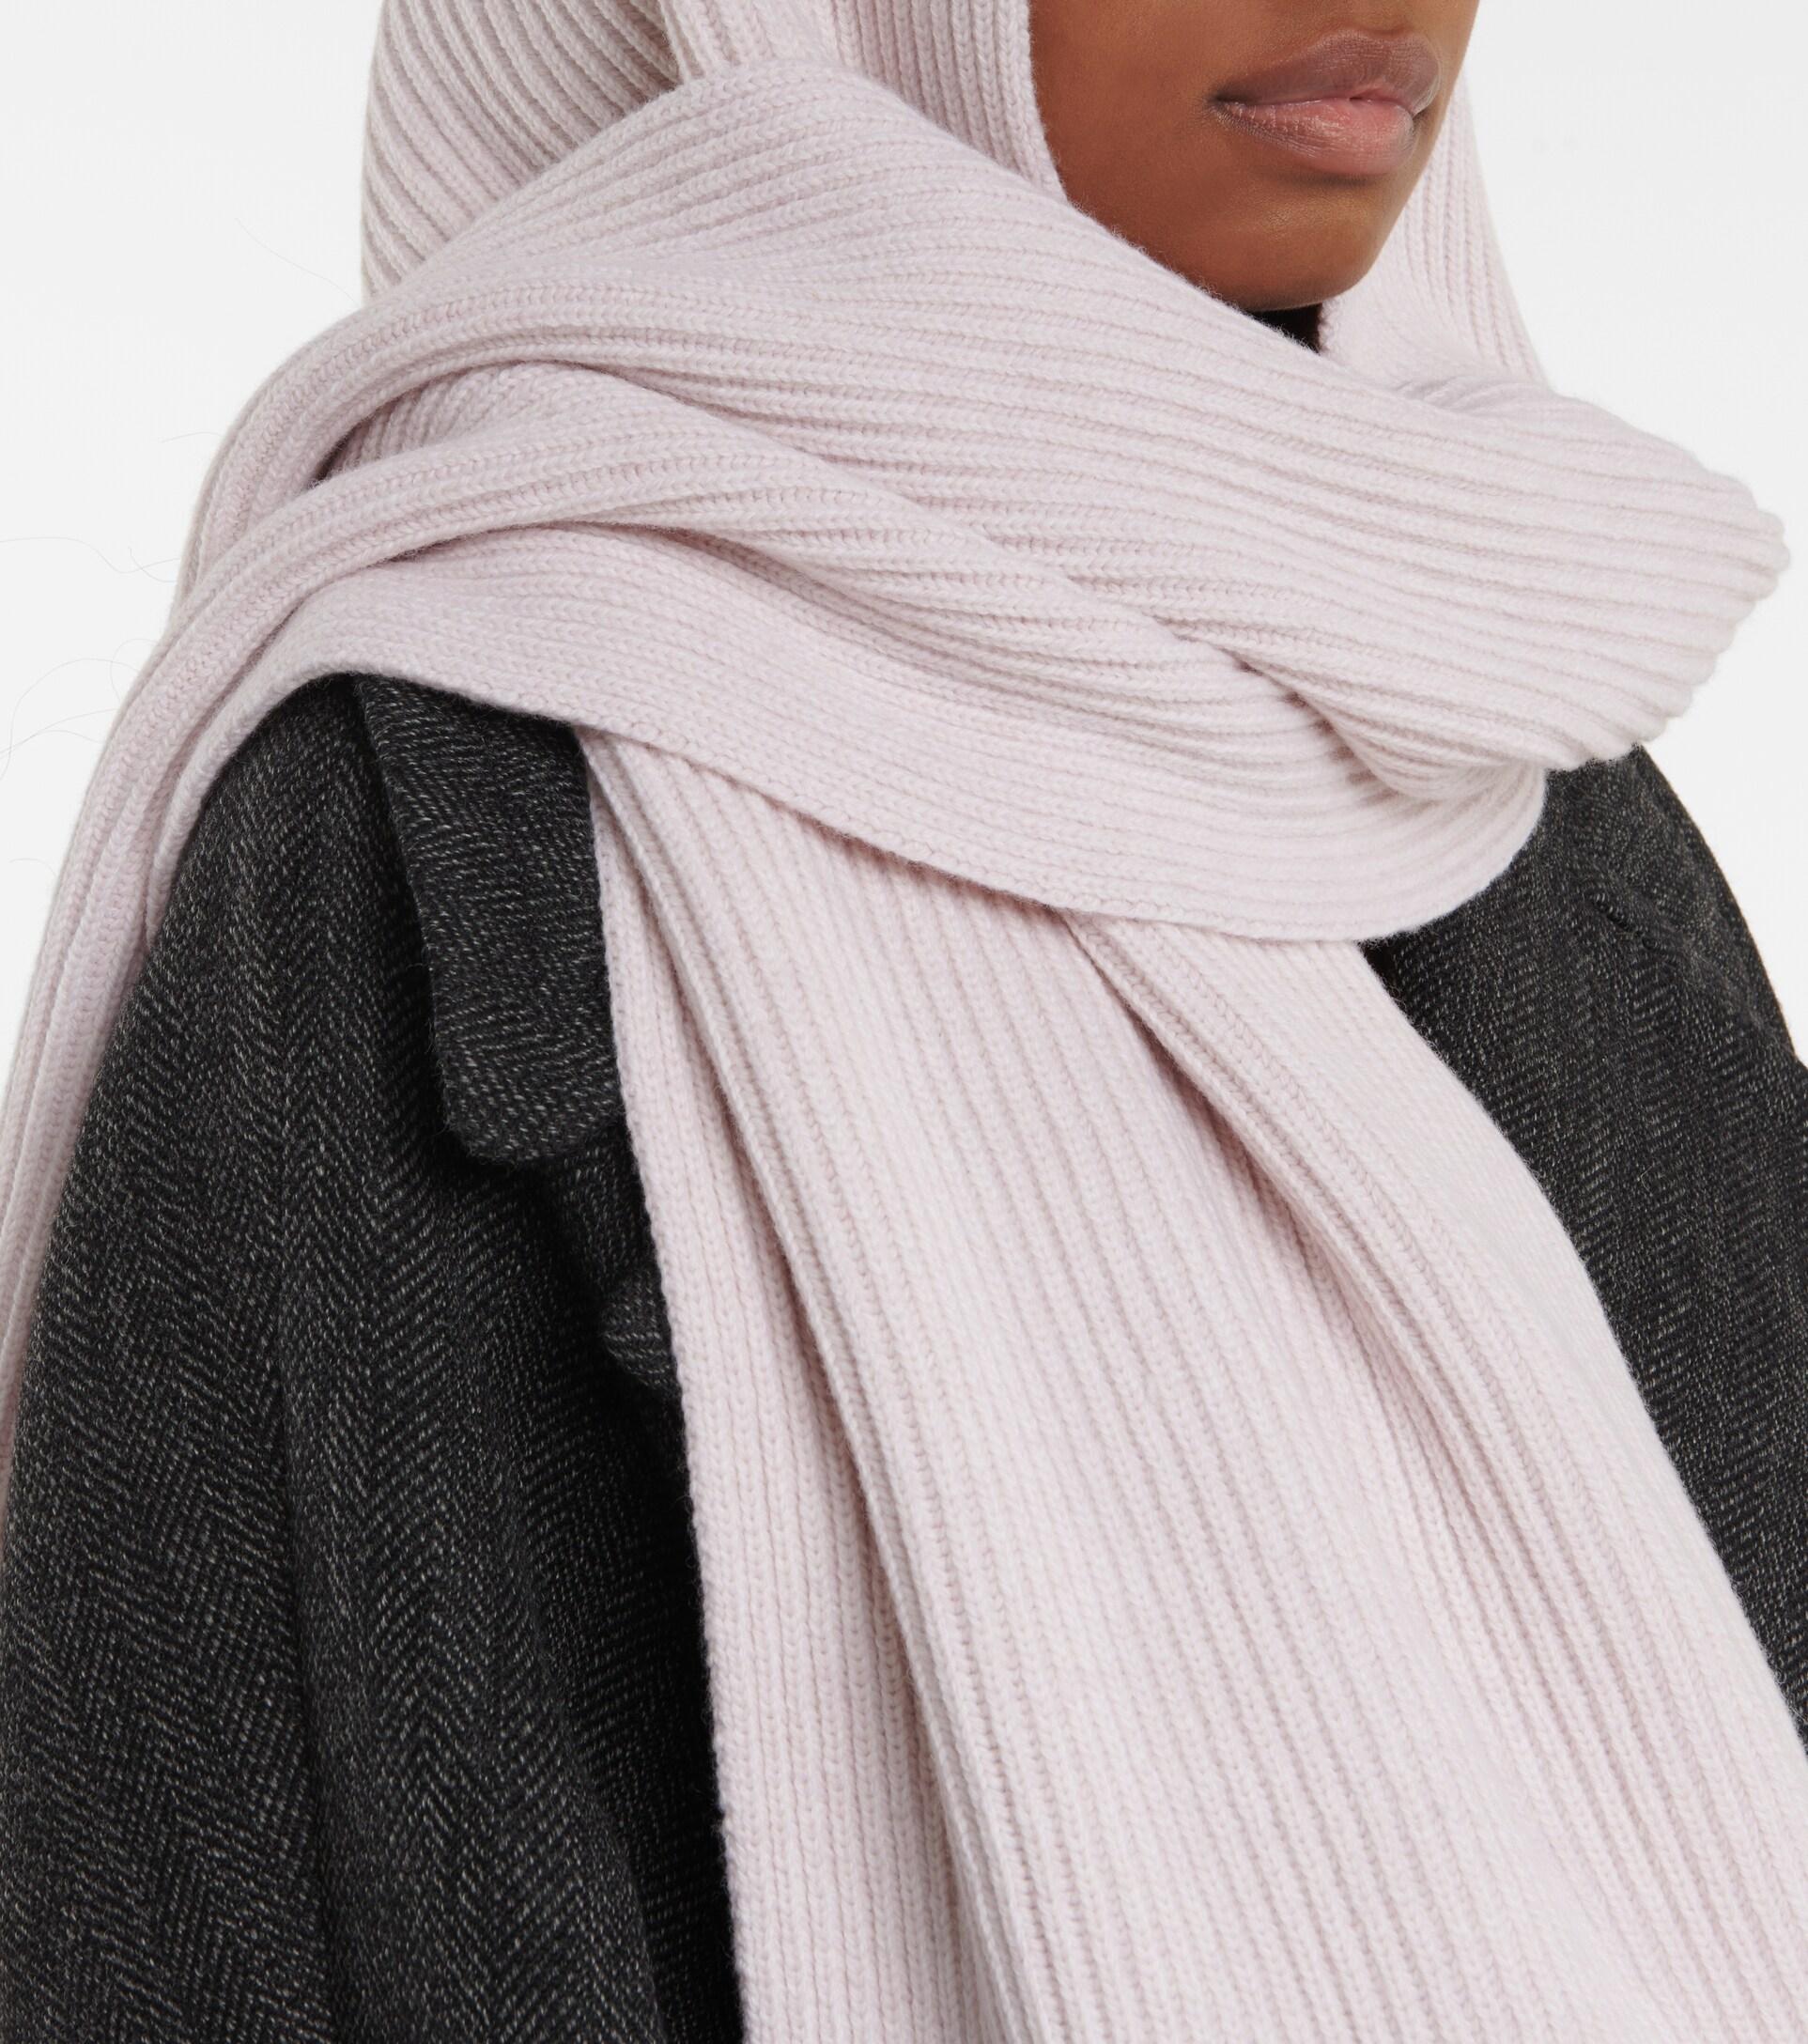 Alaïa Wool And Cashmere Hooded Scarf in Pink | Lyst